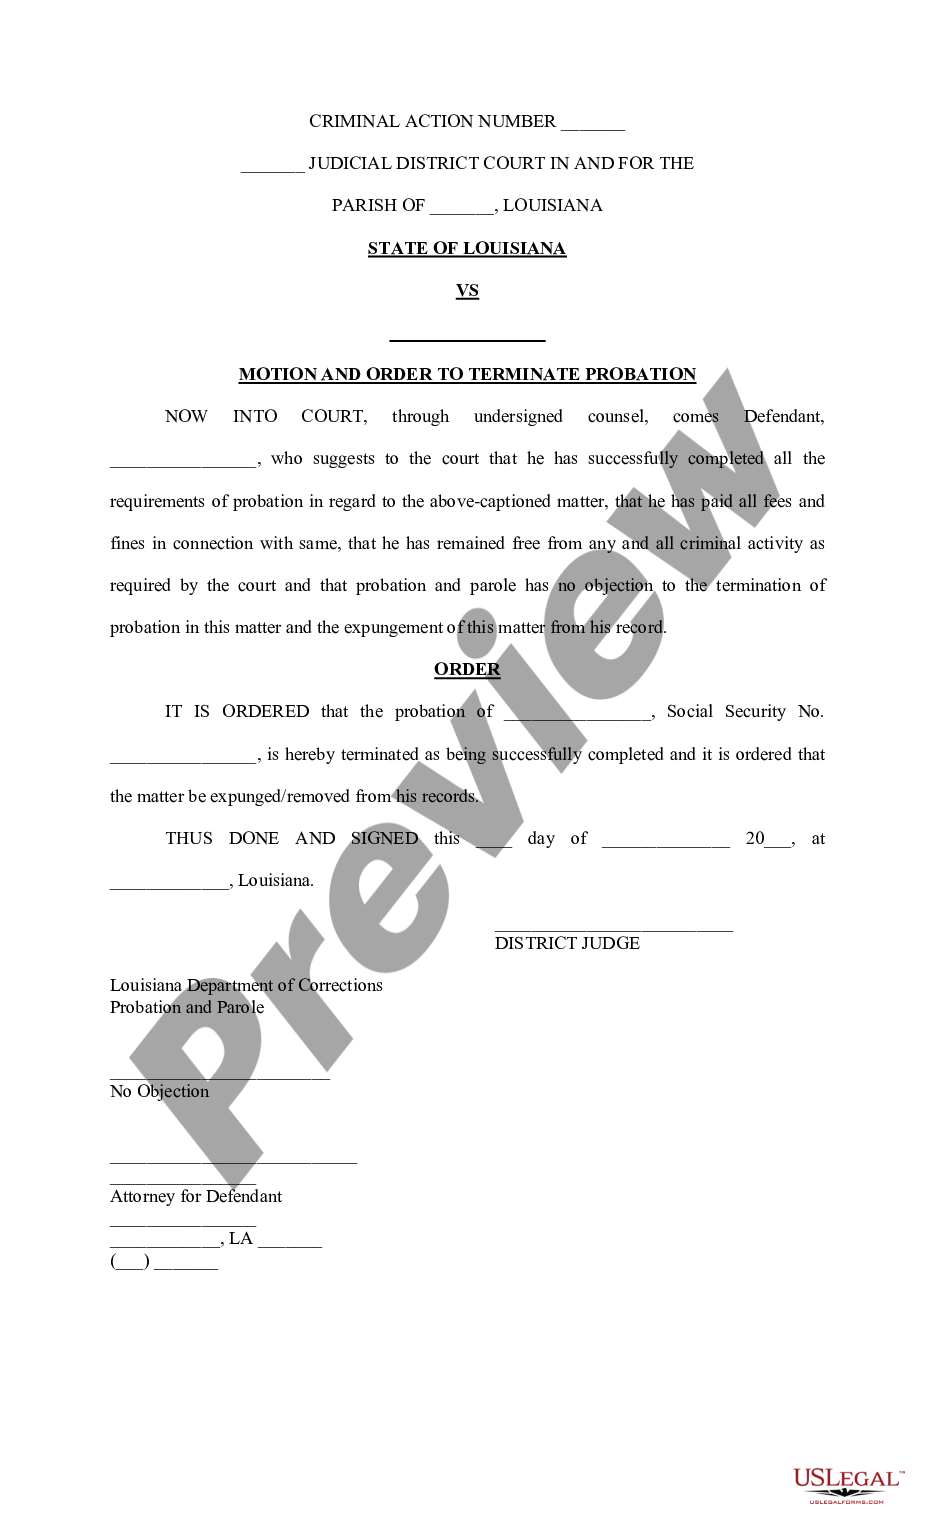 louisiana-motion-and-order-to-terminate-probation-probation-us-legal-forms